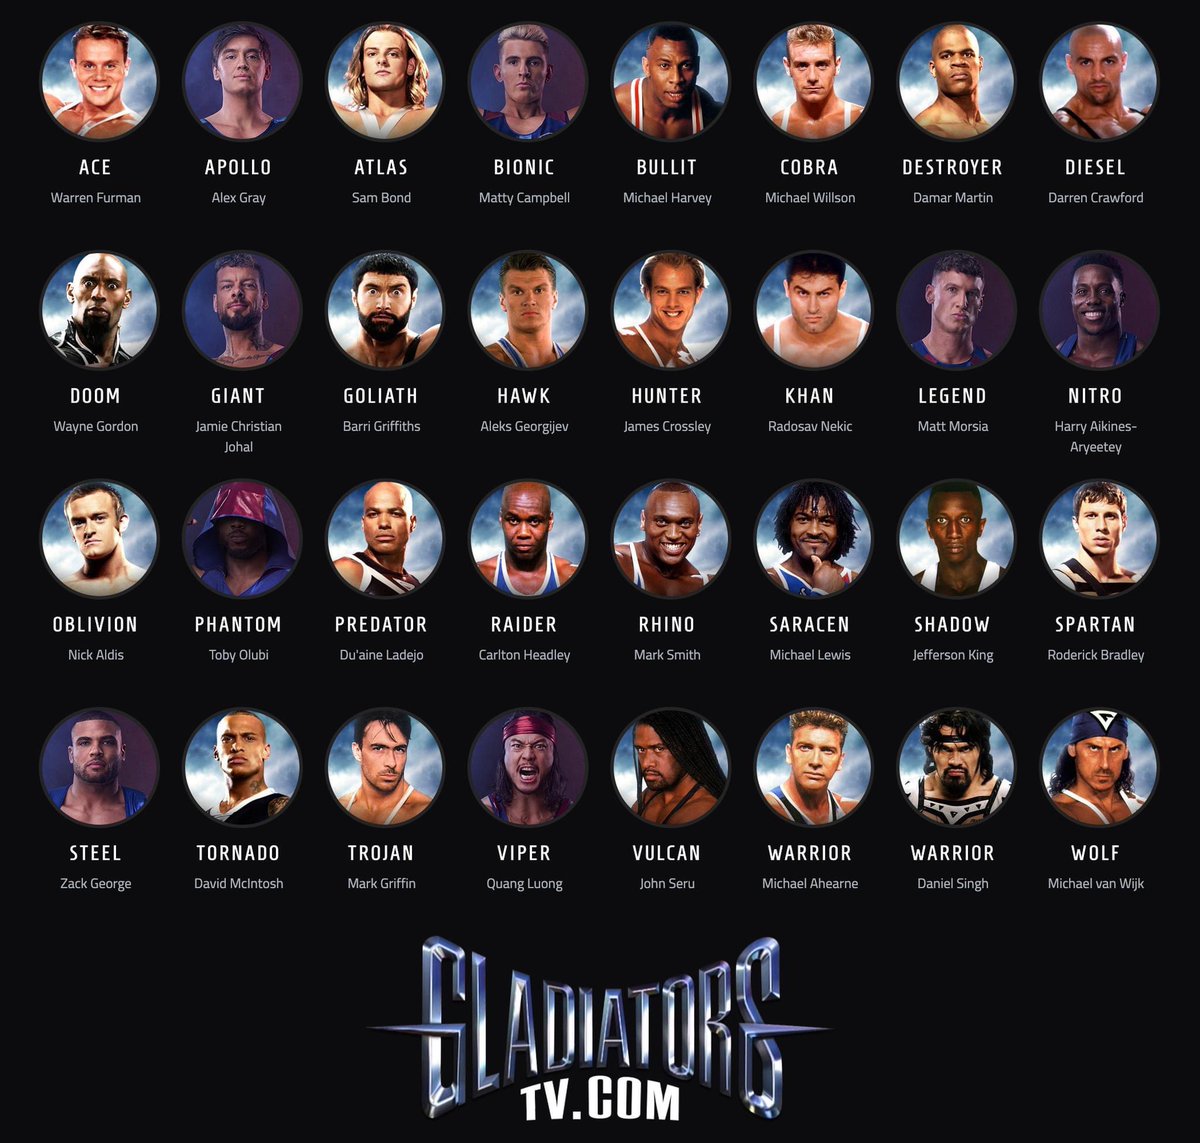 Did you know there have been 68 Gladiators across the 3 versions of the UK @GladiatorsTV series. How many do you remember? 

Get to know each of them, including the newest generation, by visiting: gladiatorstv.com/gladiators/ #Gladiators